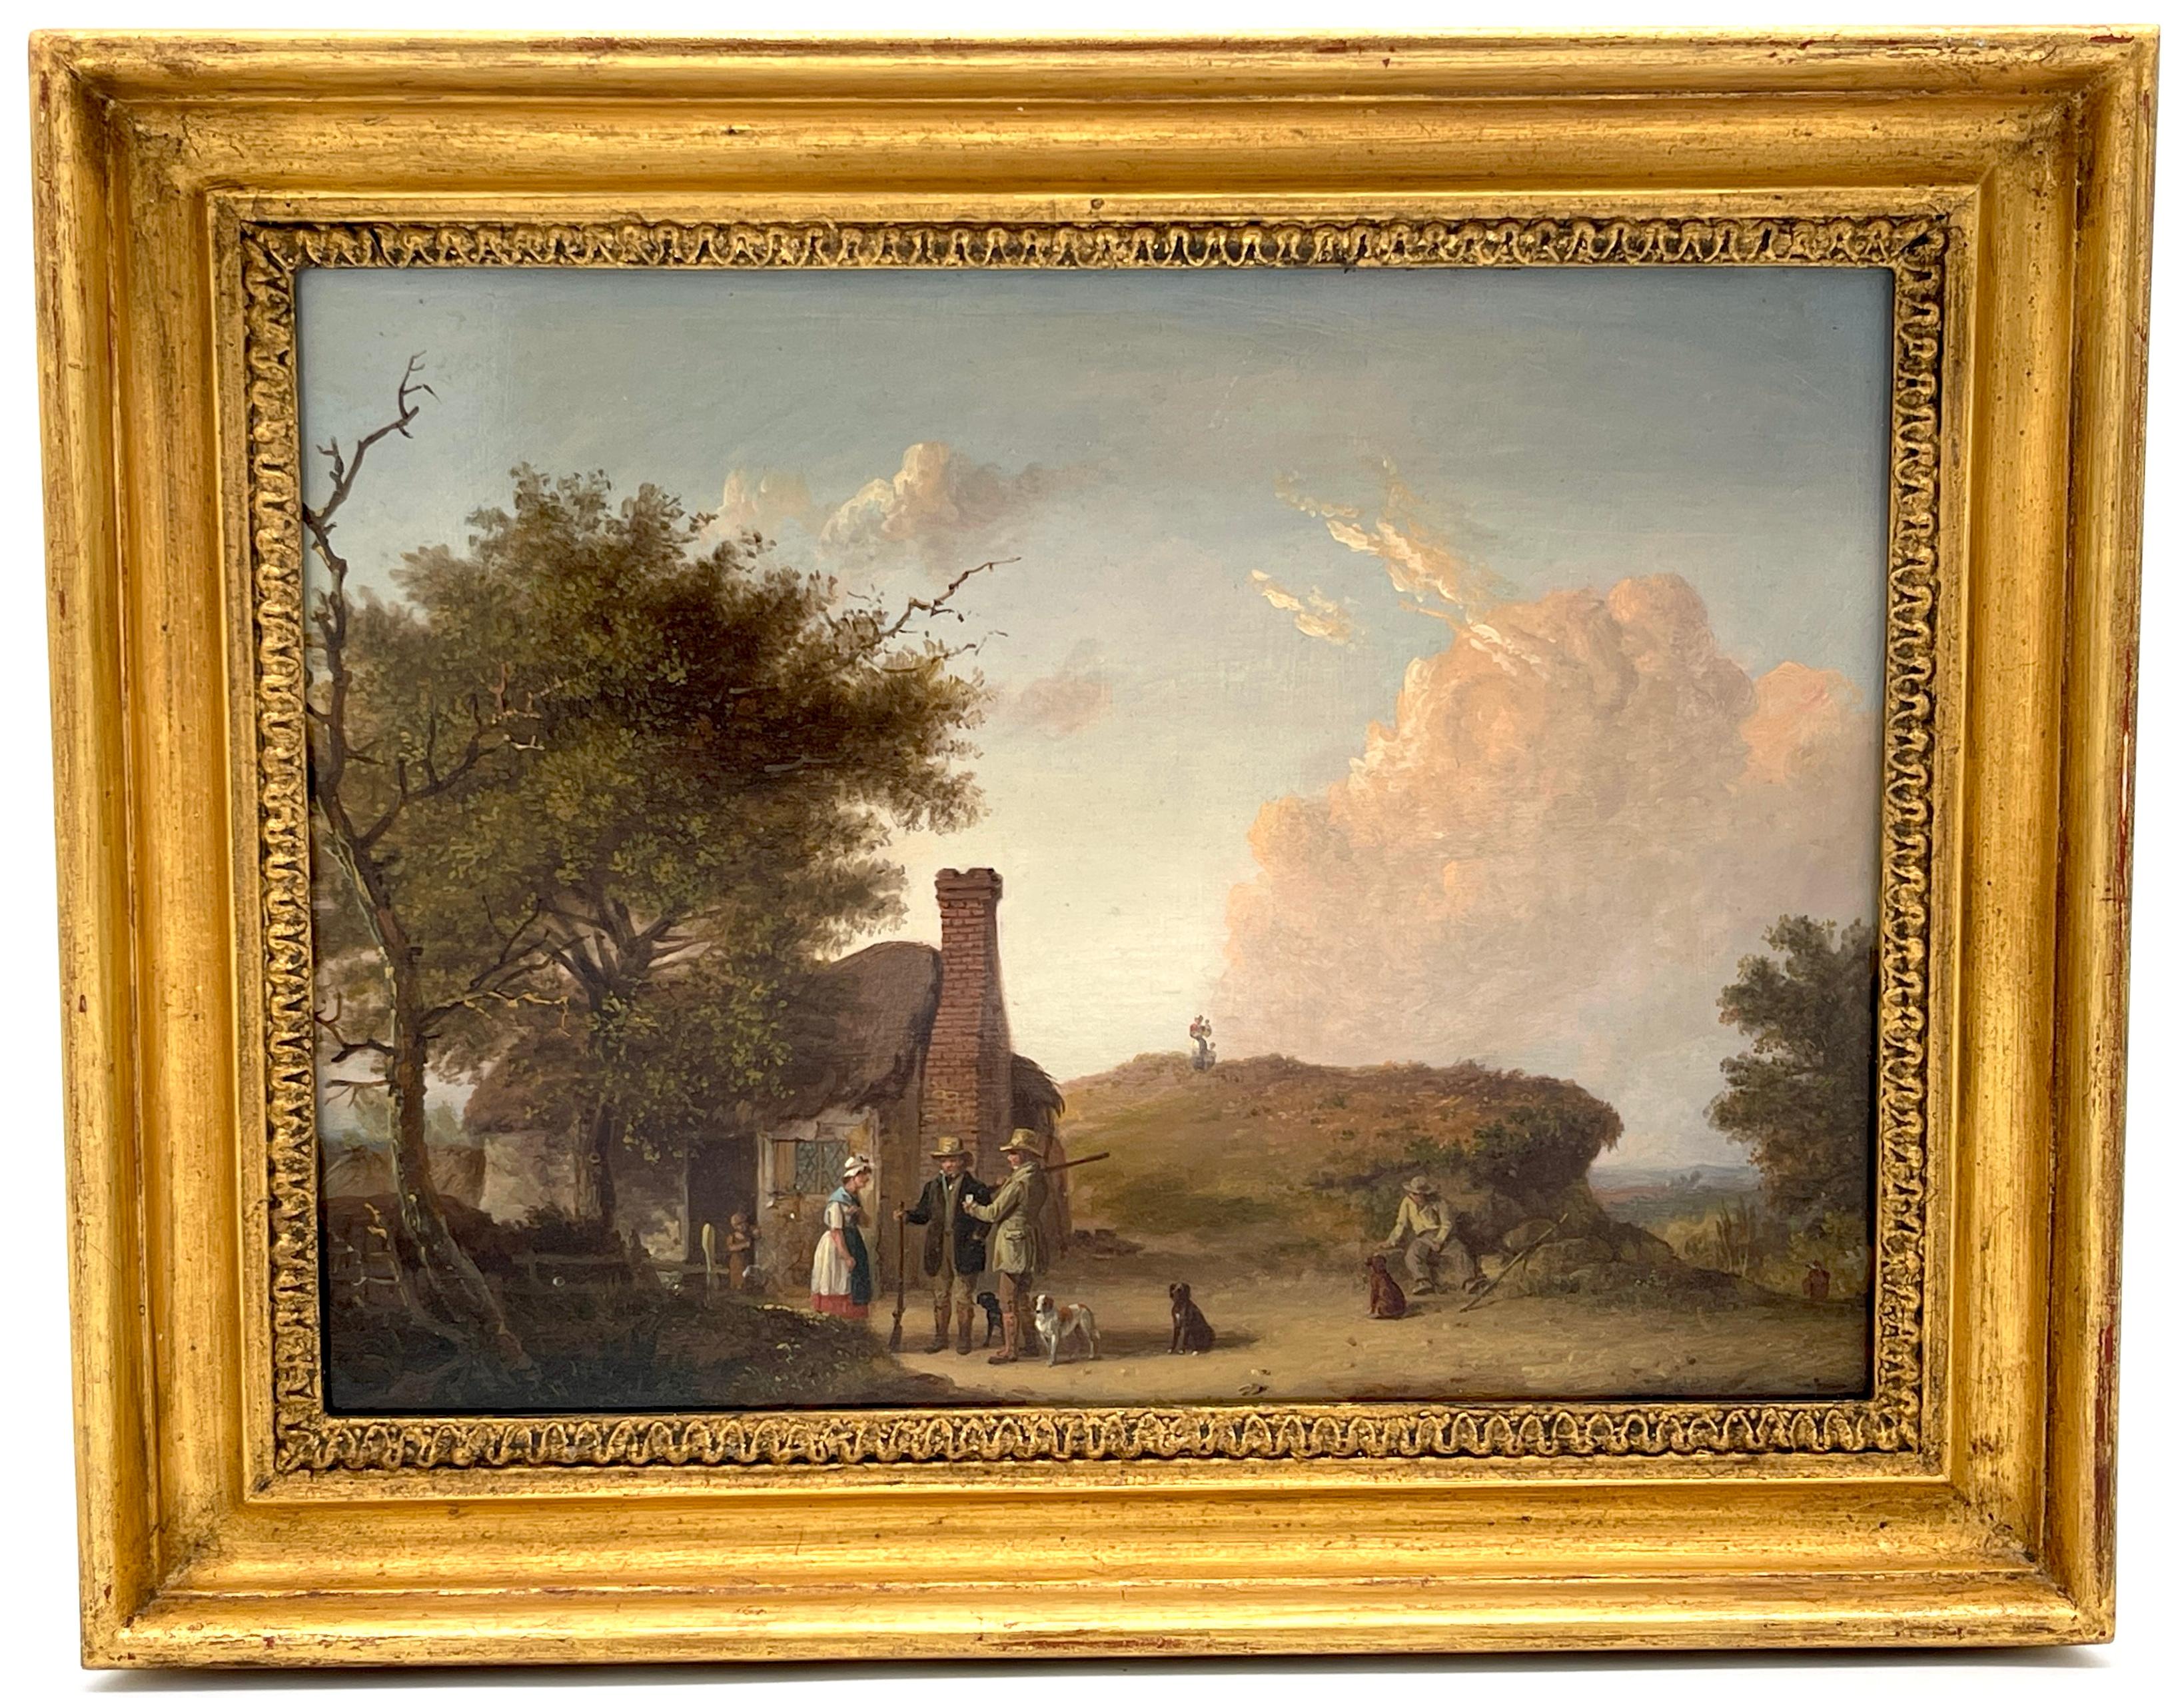 19th C English Sporting Landscape with Hunters & Dogs, by Edmund Bristow 
Provenance : Arthur Ackermann & Son Ltd. 33 New Bond Street London 
Edmund Bristow (BRITISH, 1787–1876) 'Sportsmen with their dogs outside a cottage' 
Panel with added Cradle 